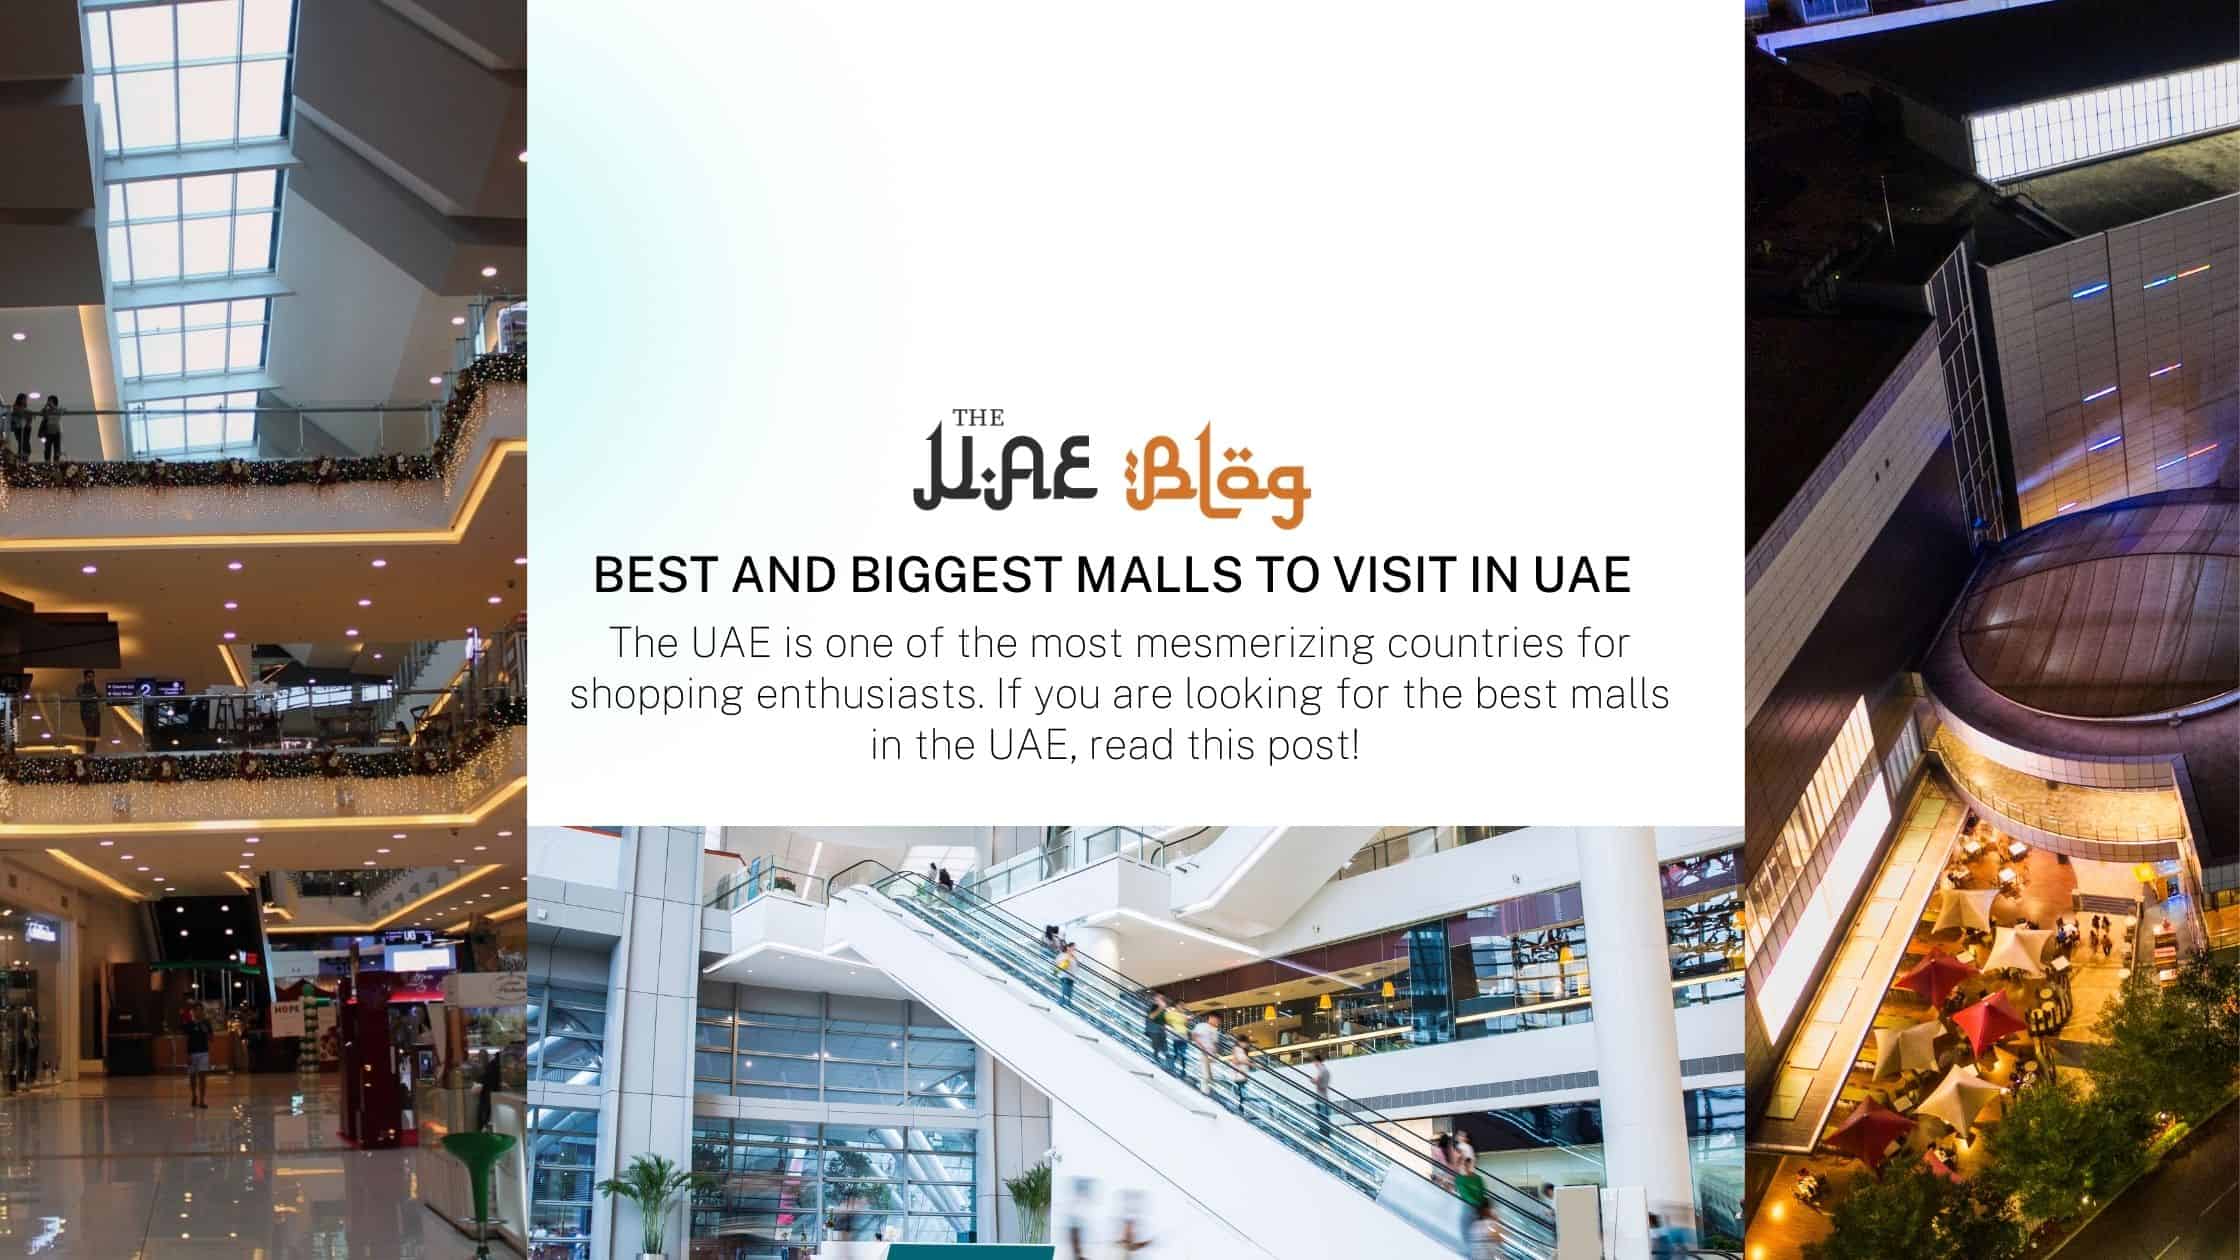 Best and biggest malls to visit in UAE